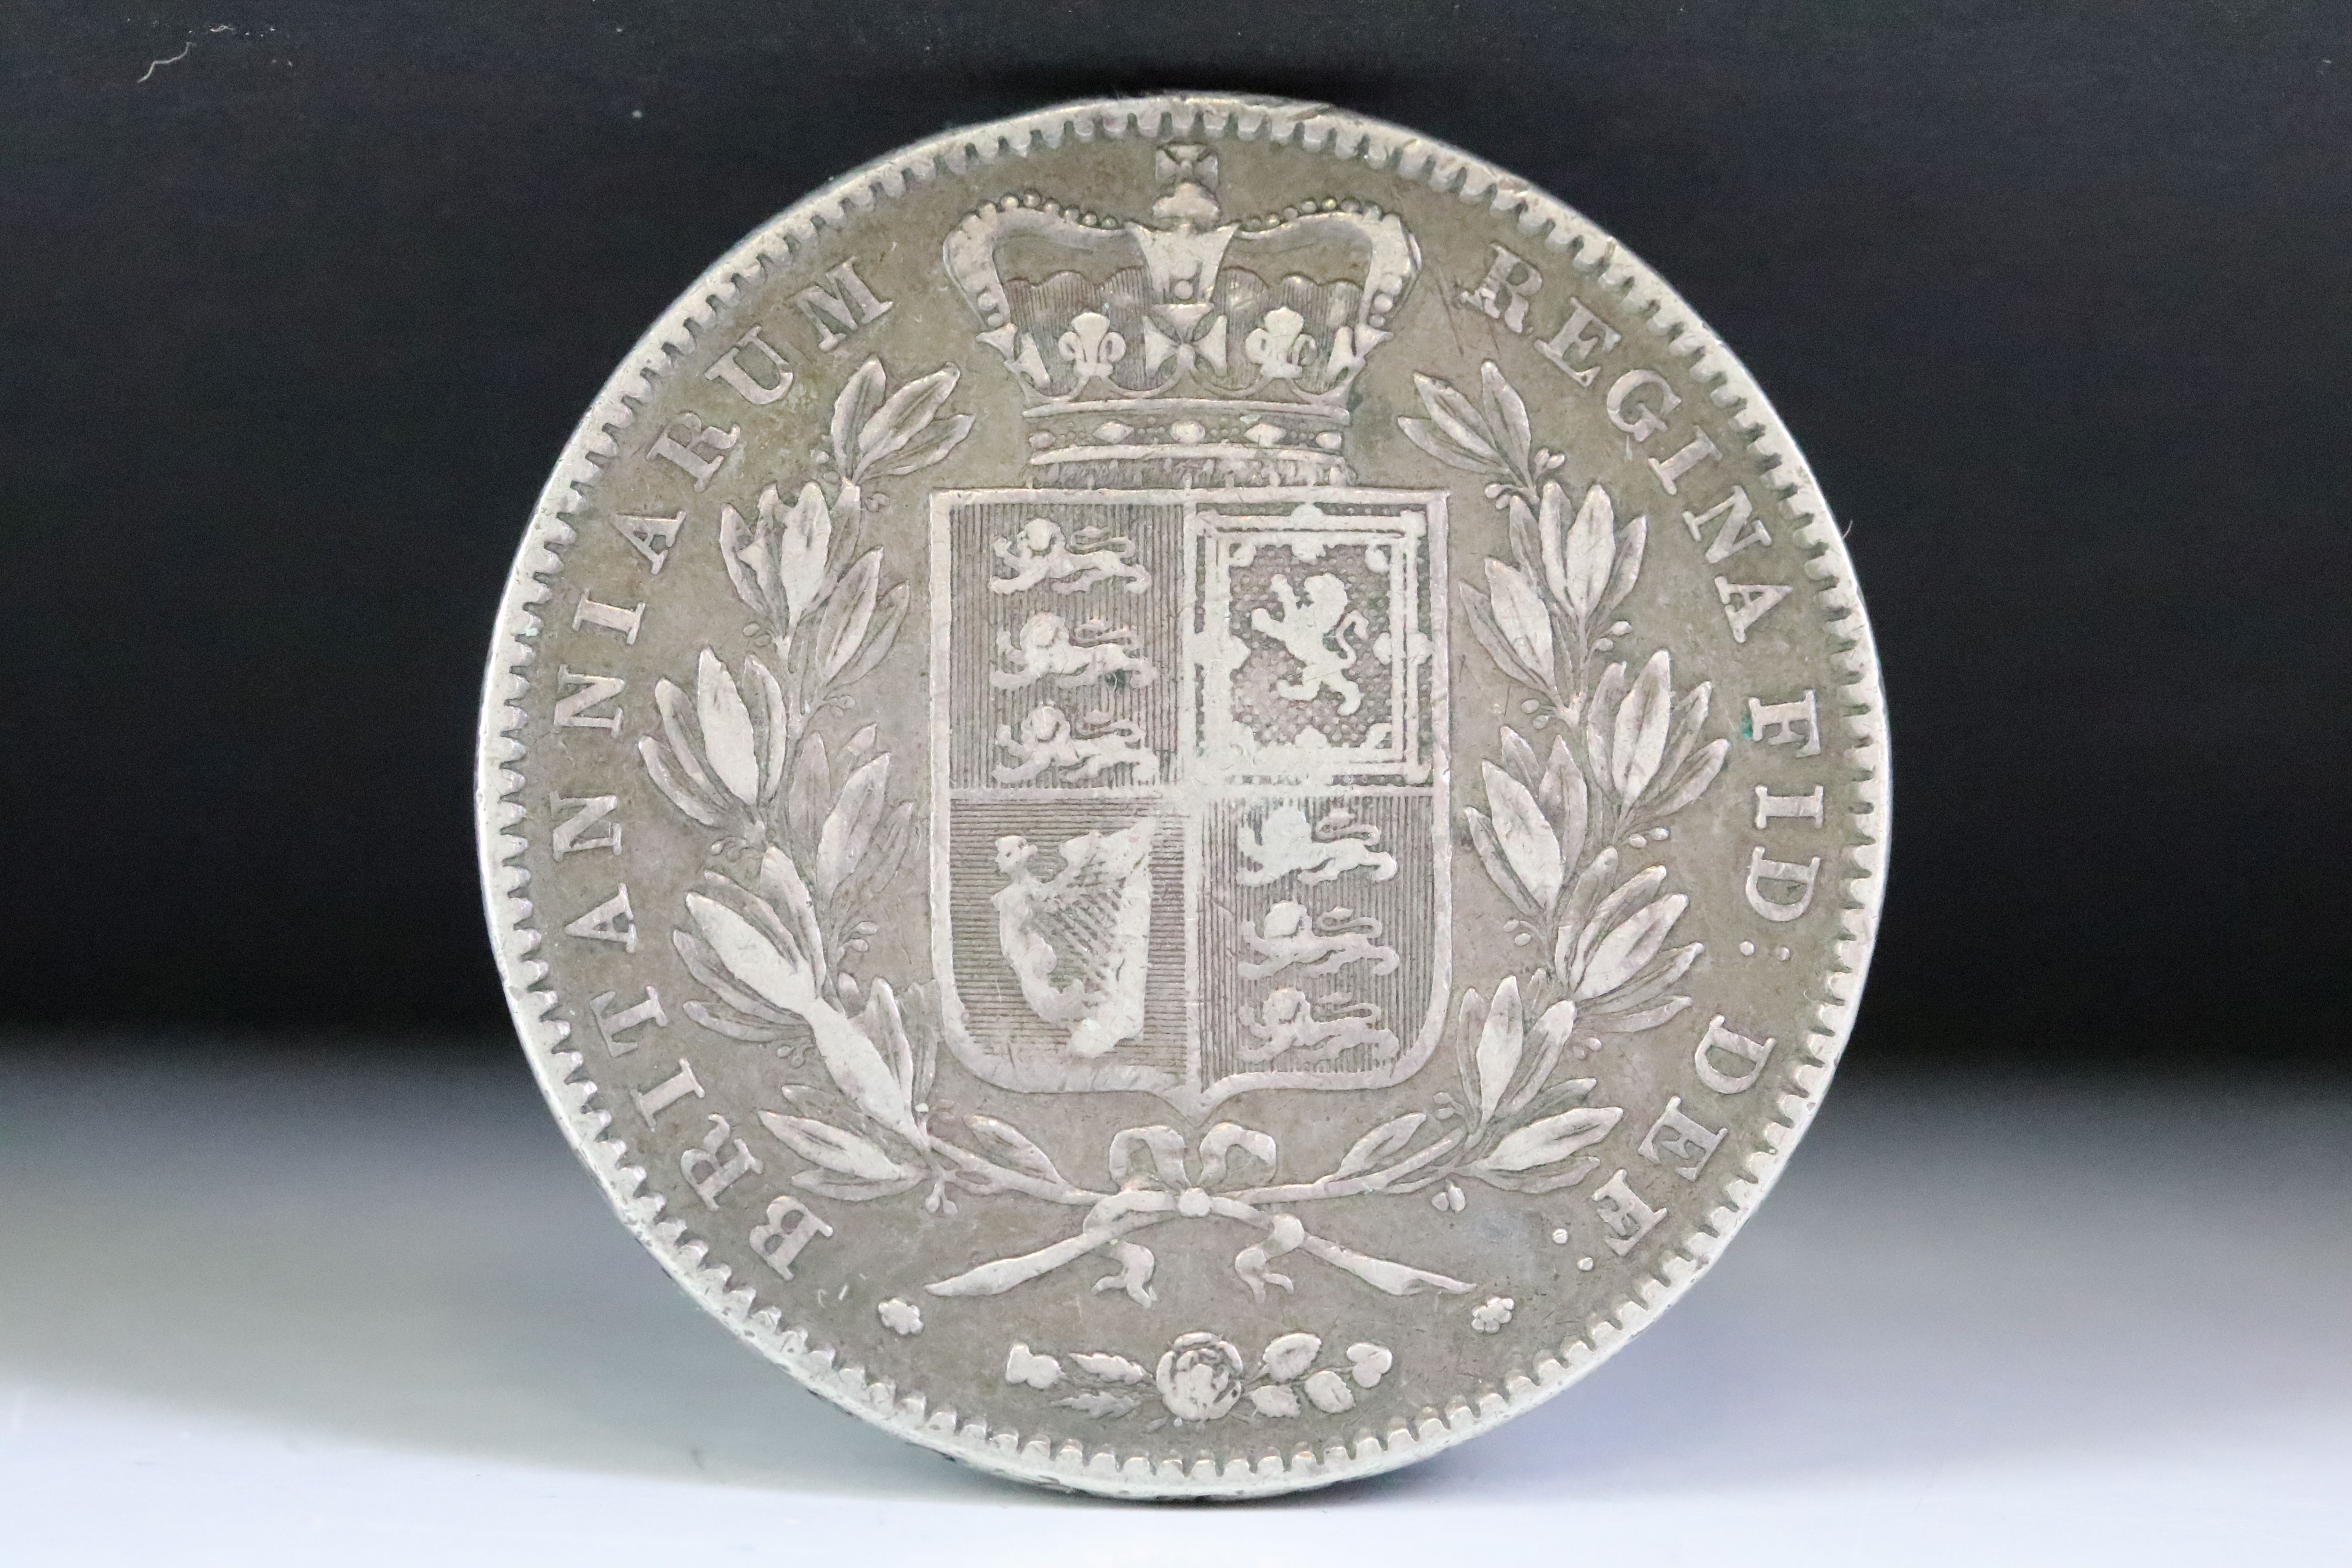 A British Queen Victoria (Young Head) 1844 silver full crown coin.